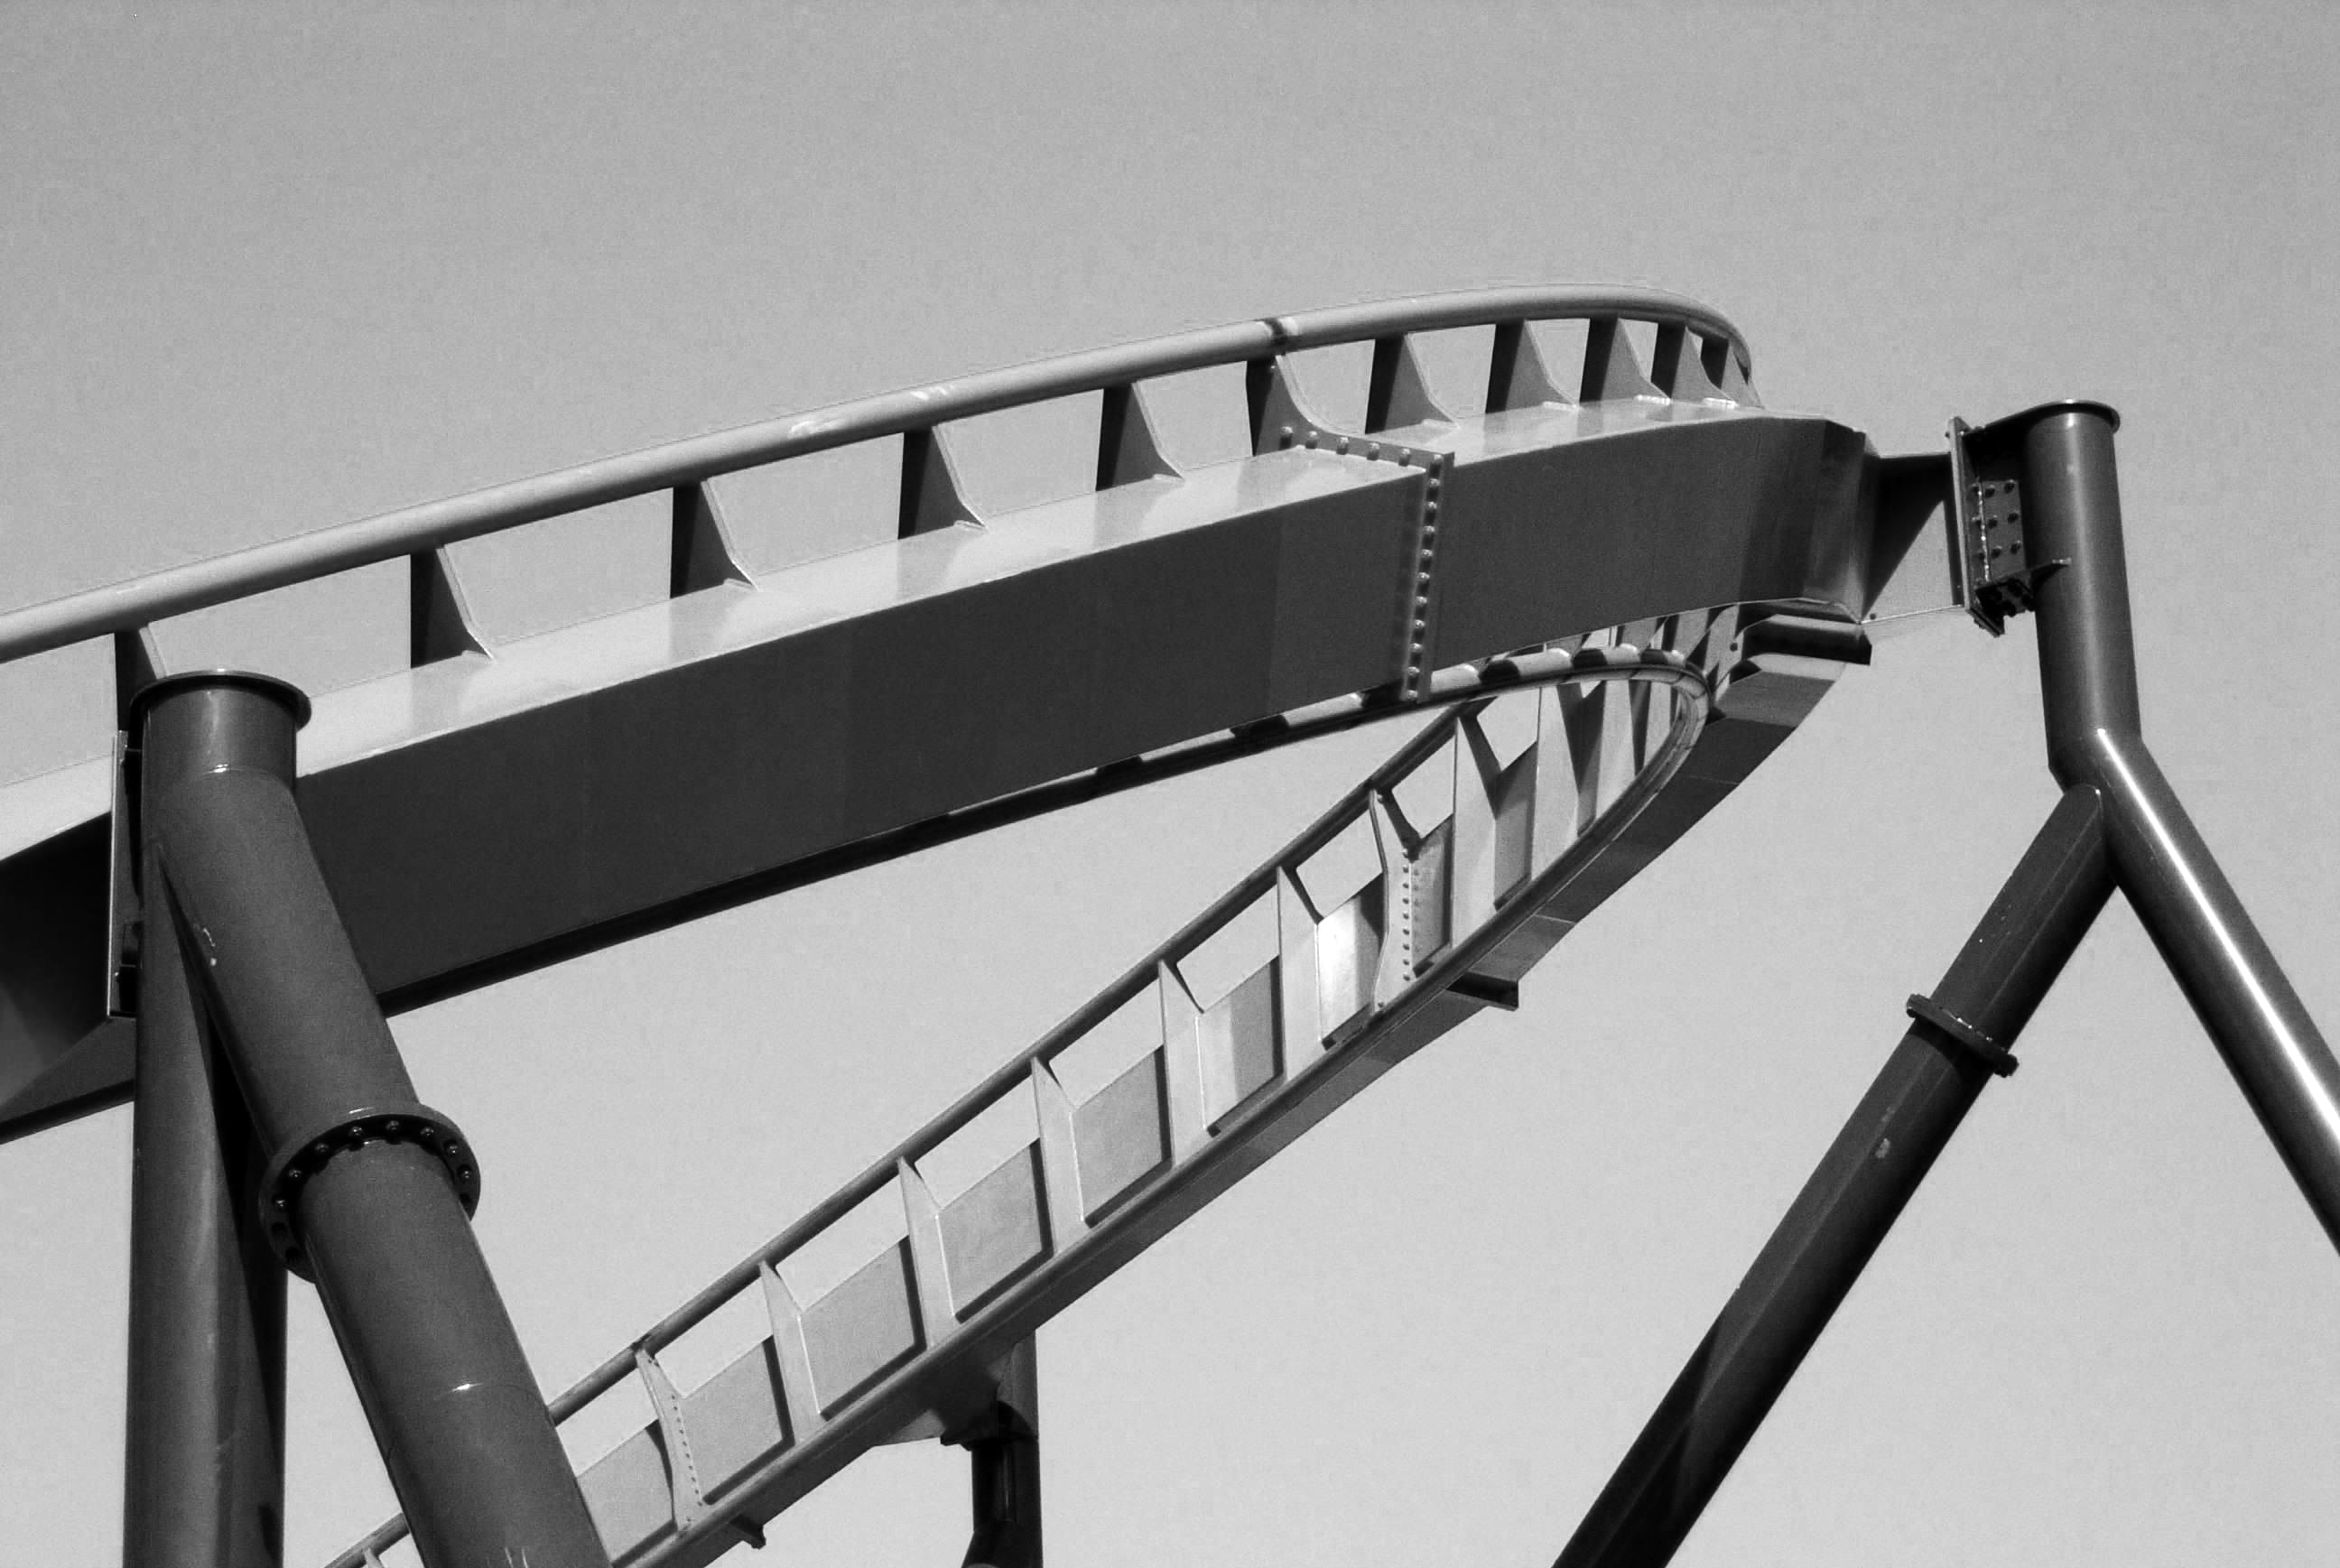 Black-and-white image of a roller coaster track loop